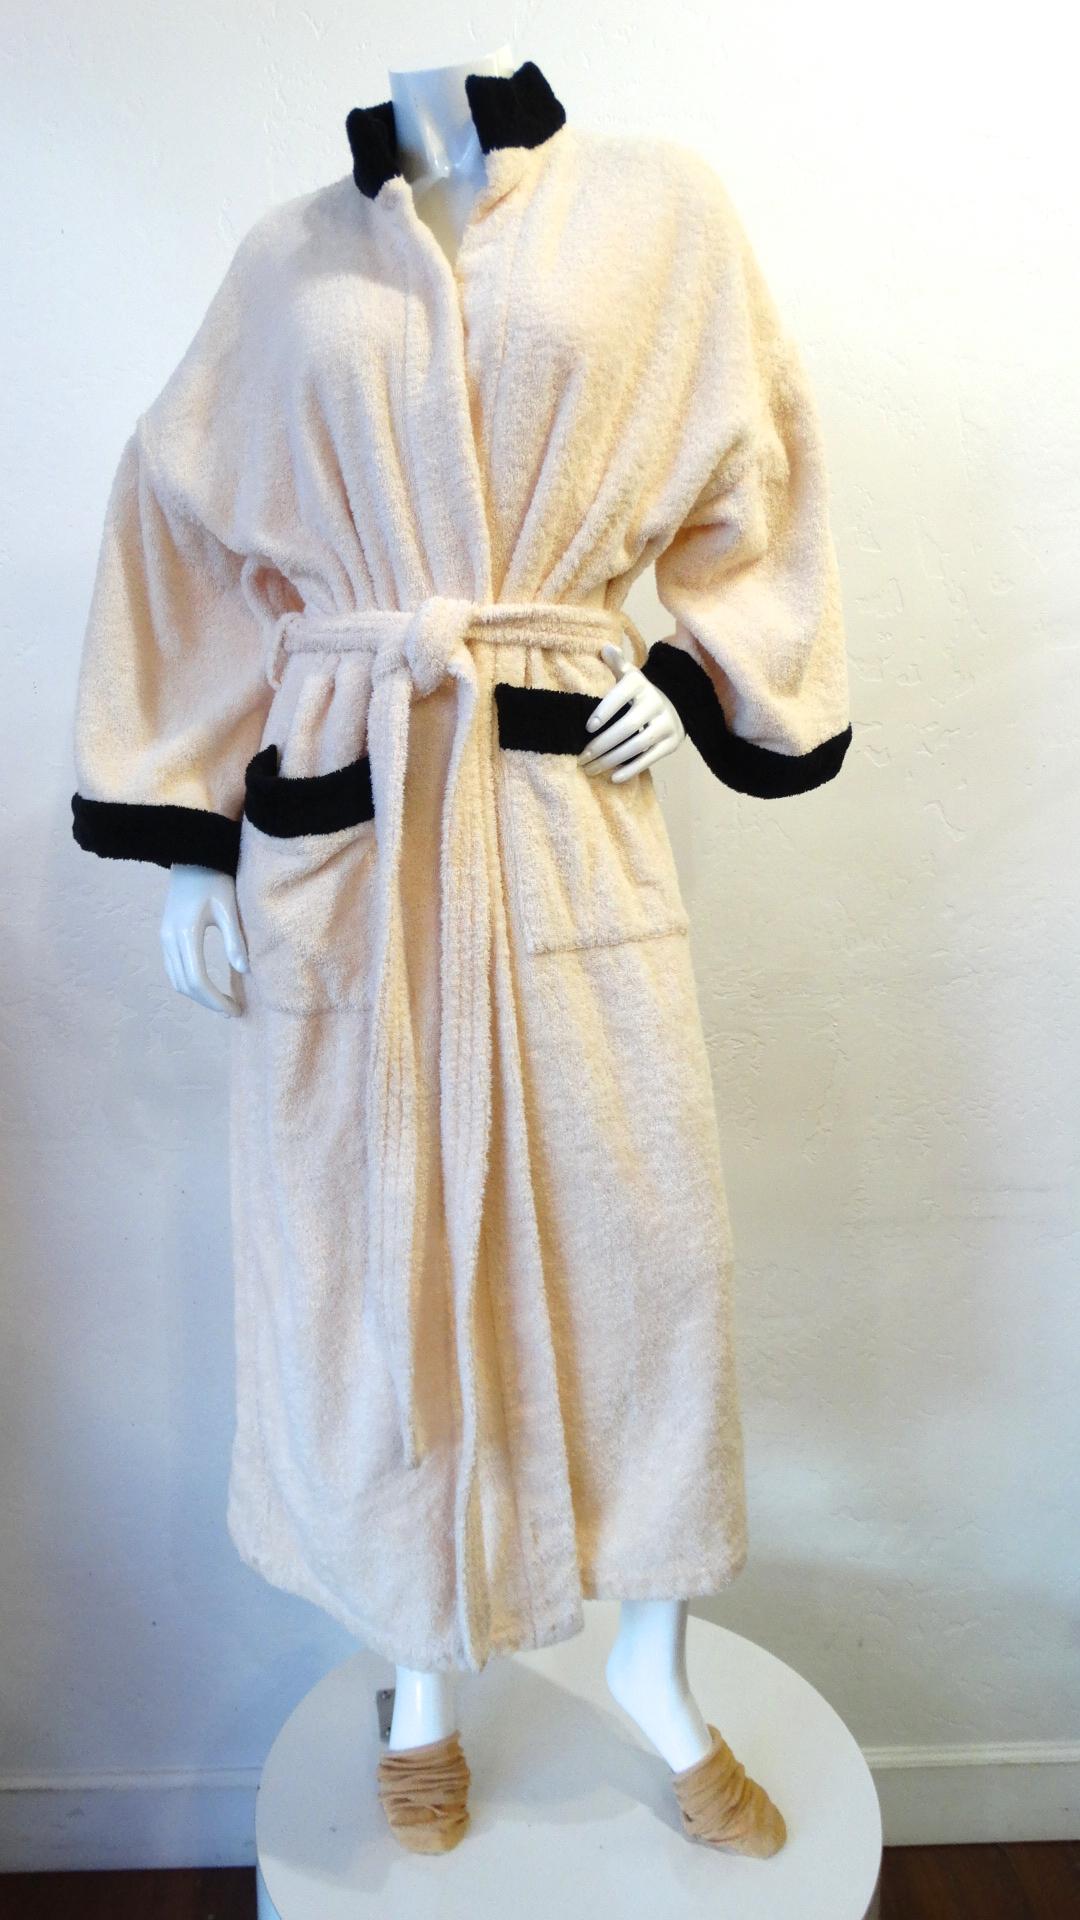 Relax In Style With This Chanel Bath Robe! Circa 1990s, this adorable soft pink terrycloth robe features black trim around the collar, billowy sleeves and on the two front square pockets. The iconic Chanel CC is included on the back. The perfect